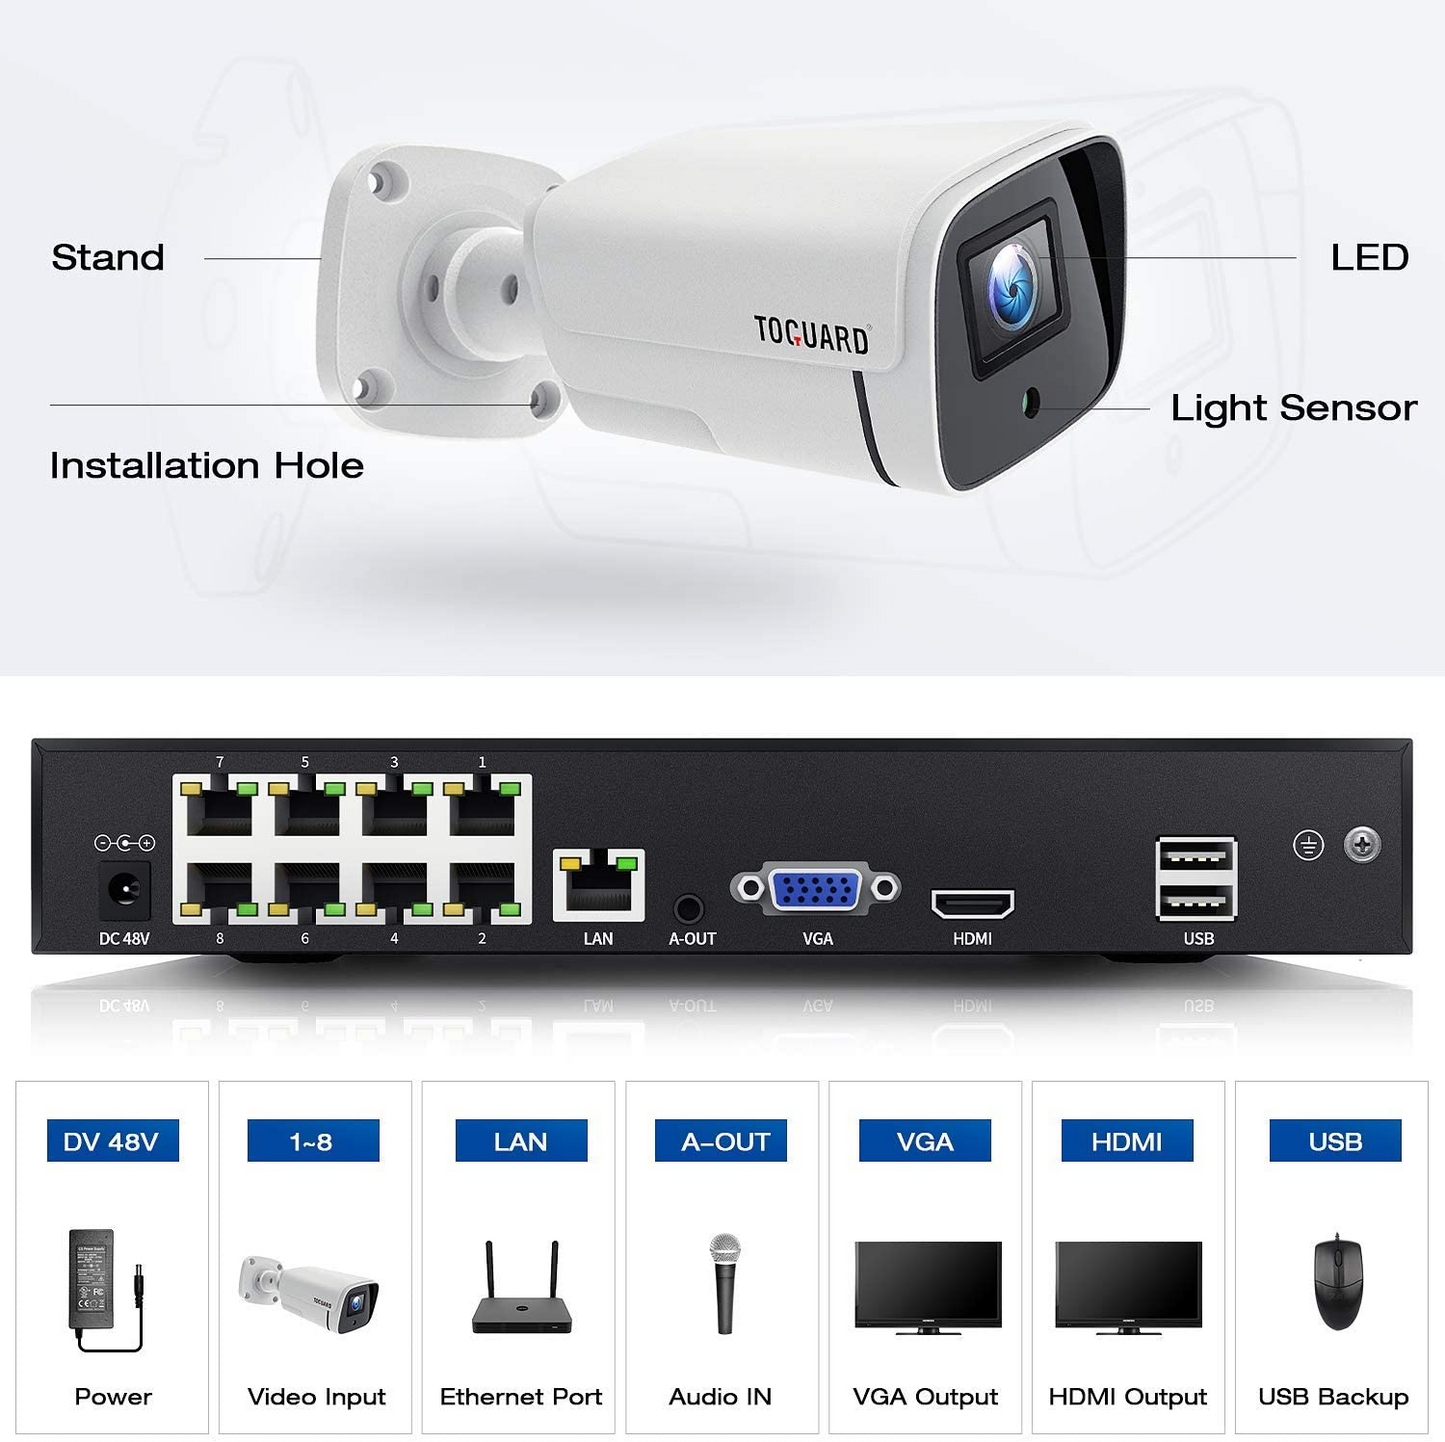 Toguard W500 4K PoE Security Camera System with 3TB Hard Drive, 4pcs 8MP Wired IP Camera Surveillance System Outdoor